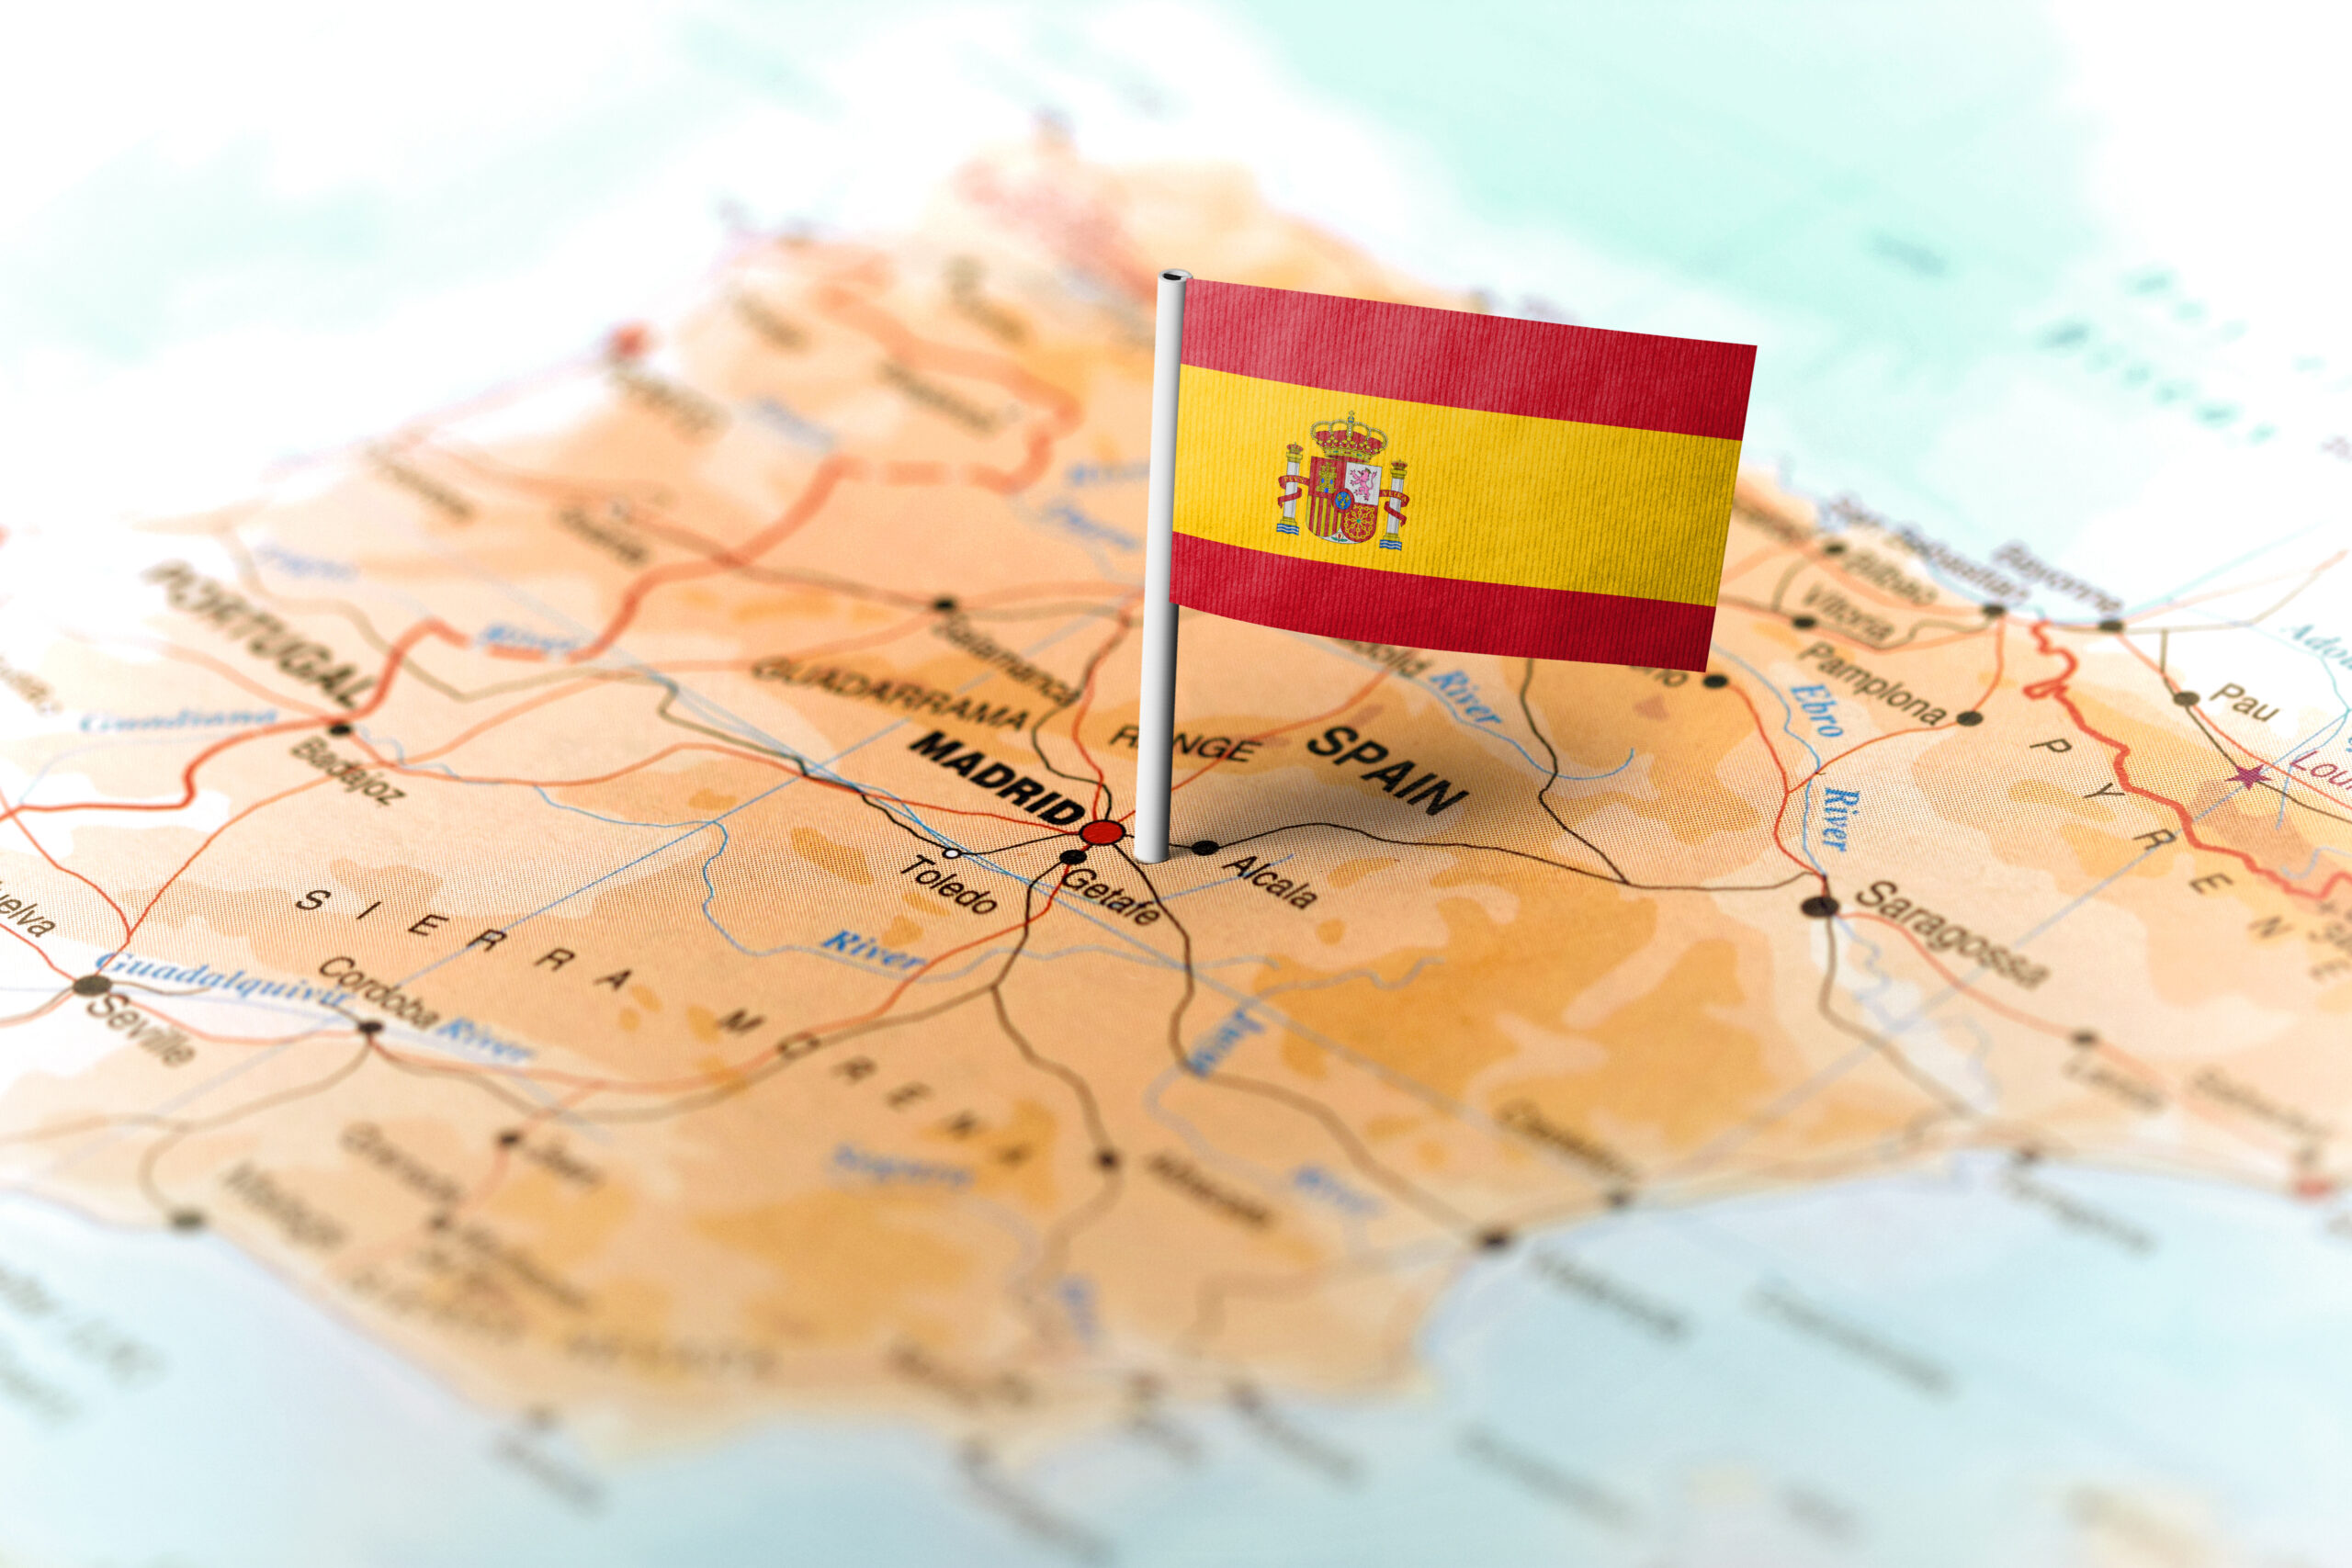 The flag of Spain pinned on the map. Horizontal orientation. Macro photography.